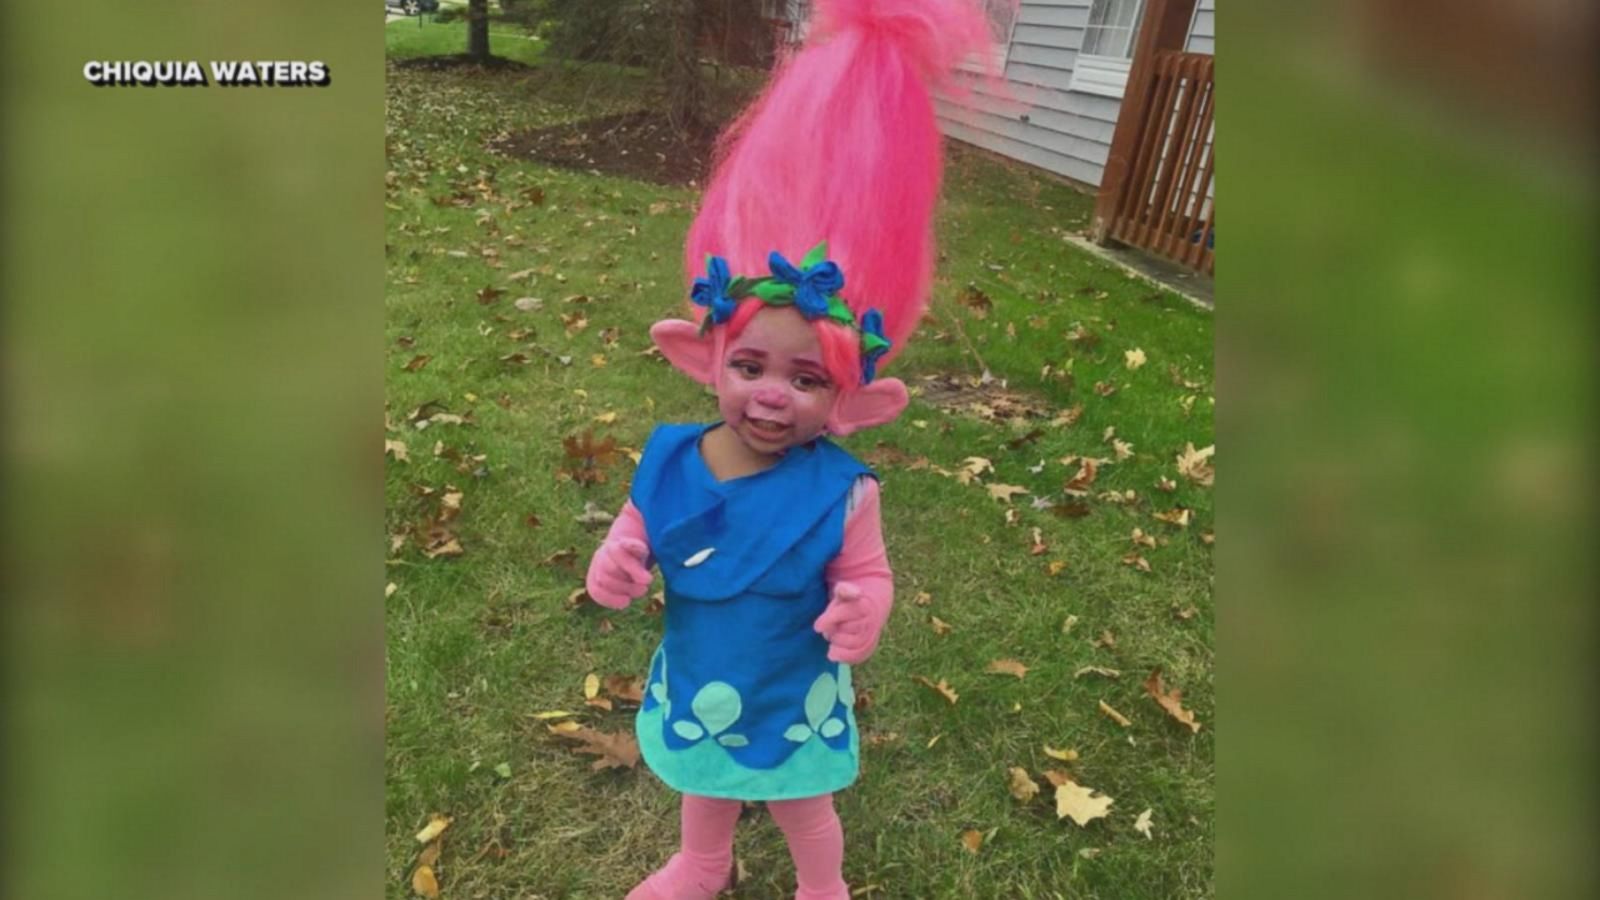 trolls for toddlers